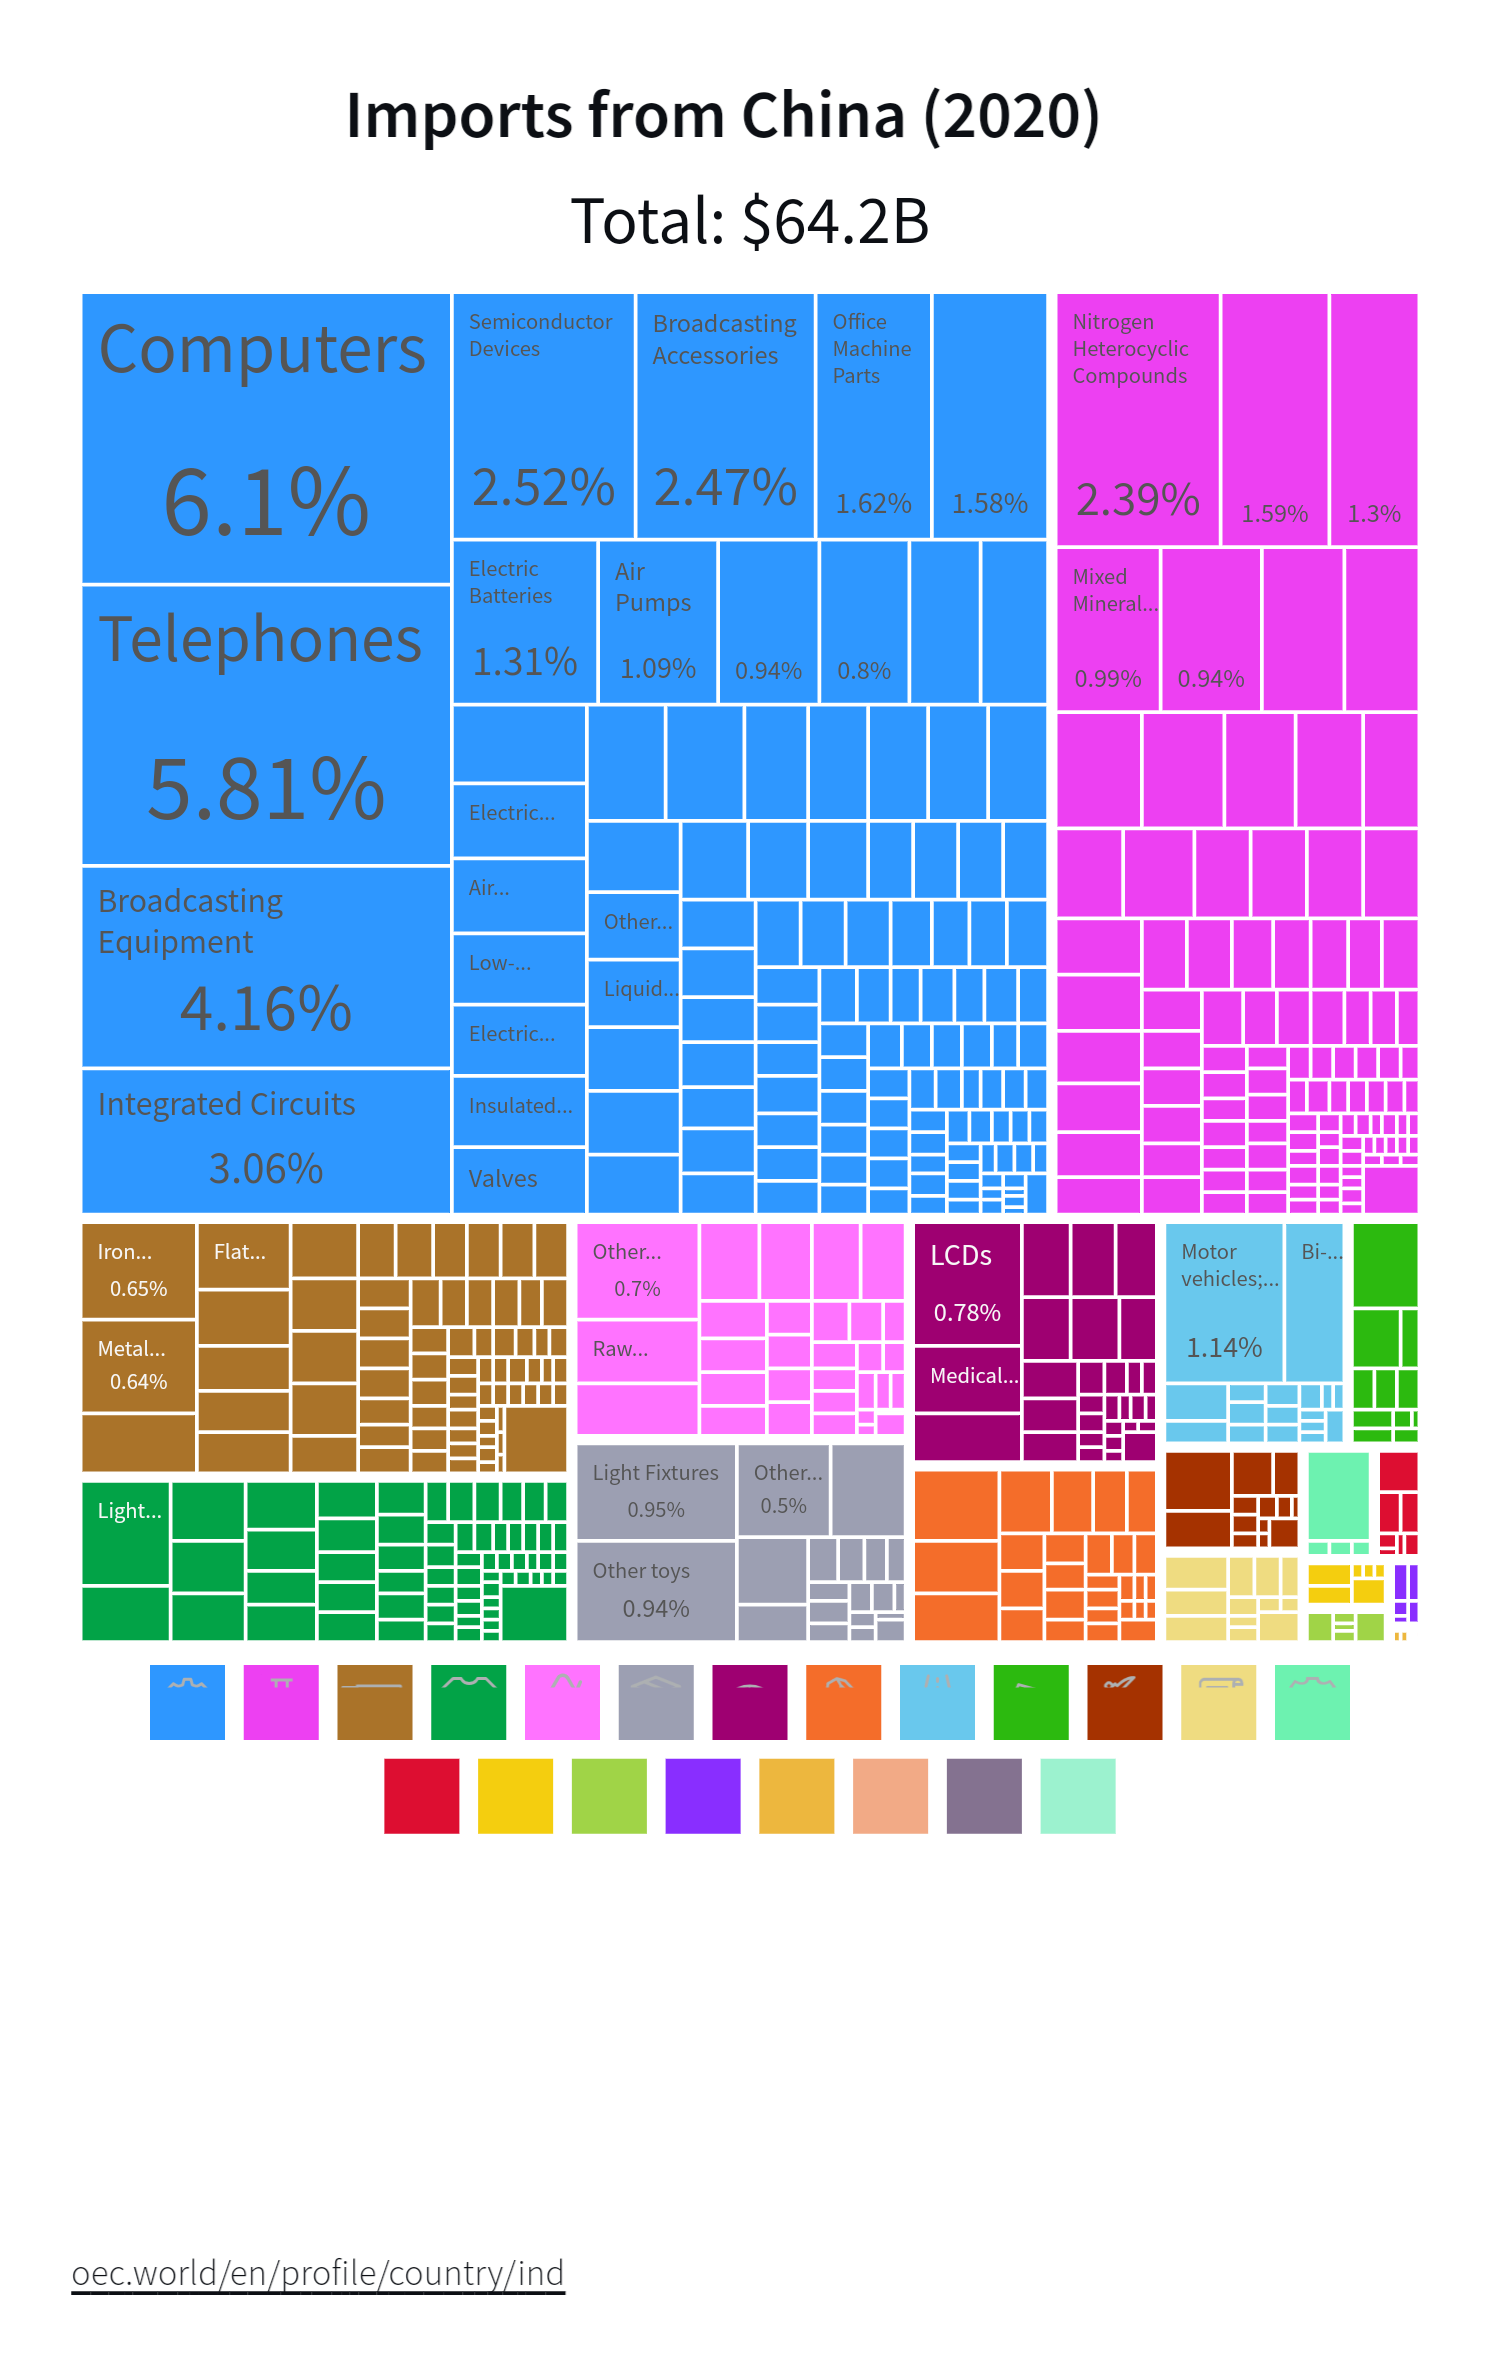 Imports-from-China-2020.png